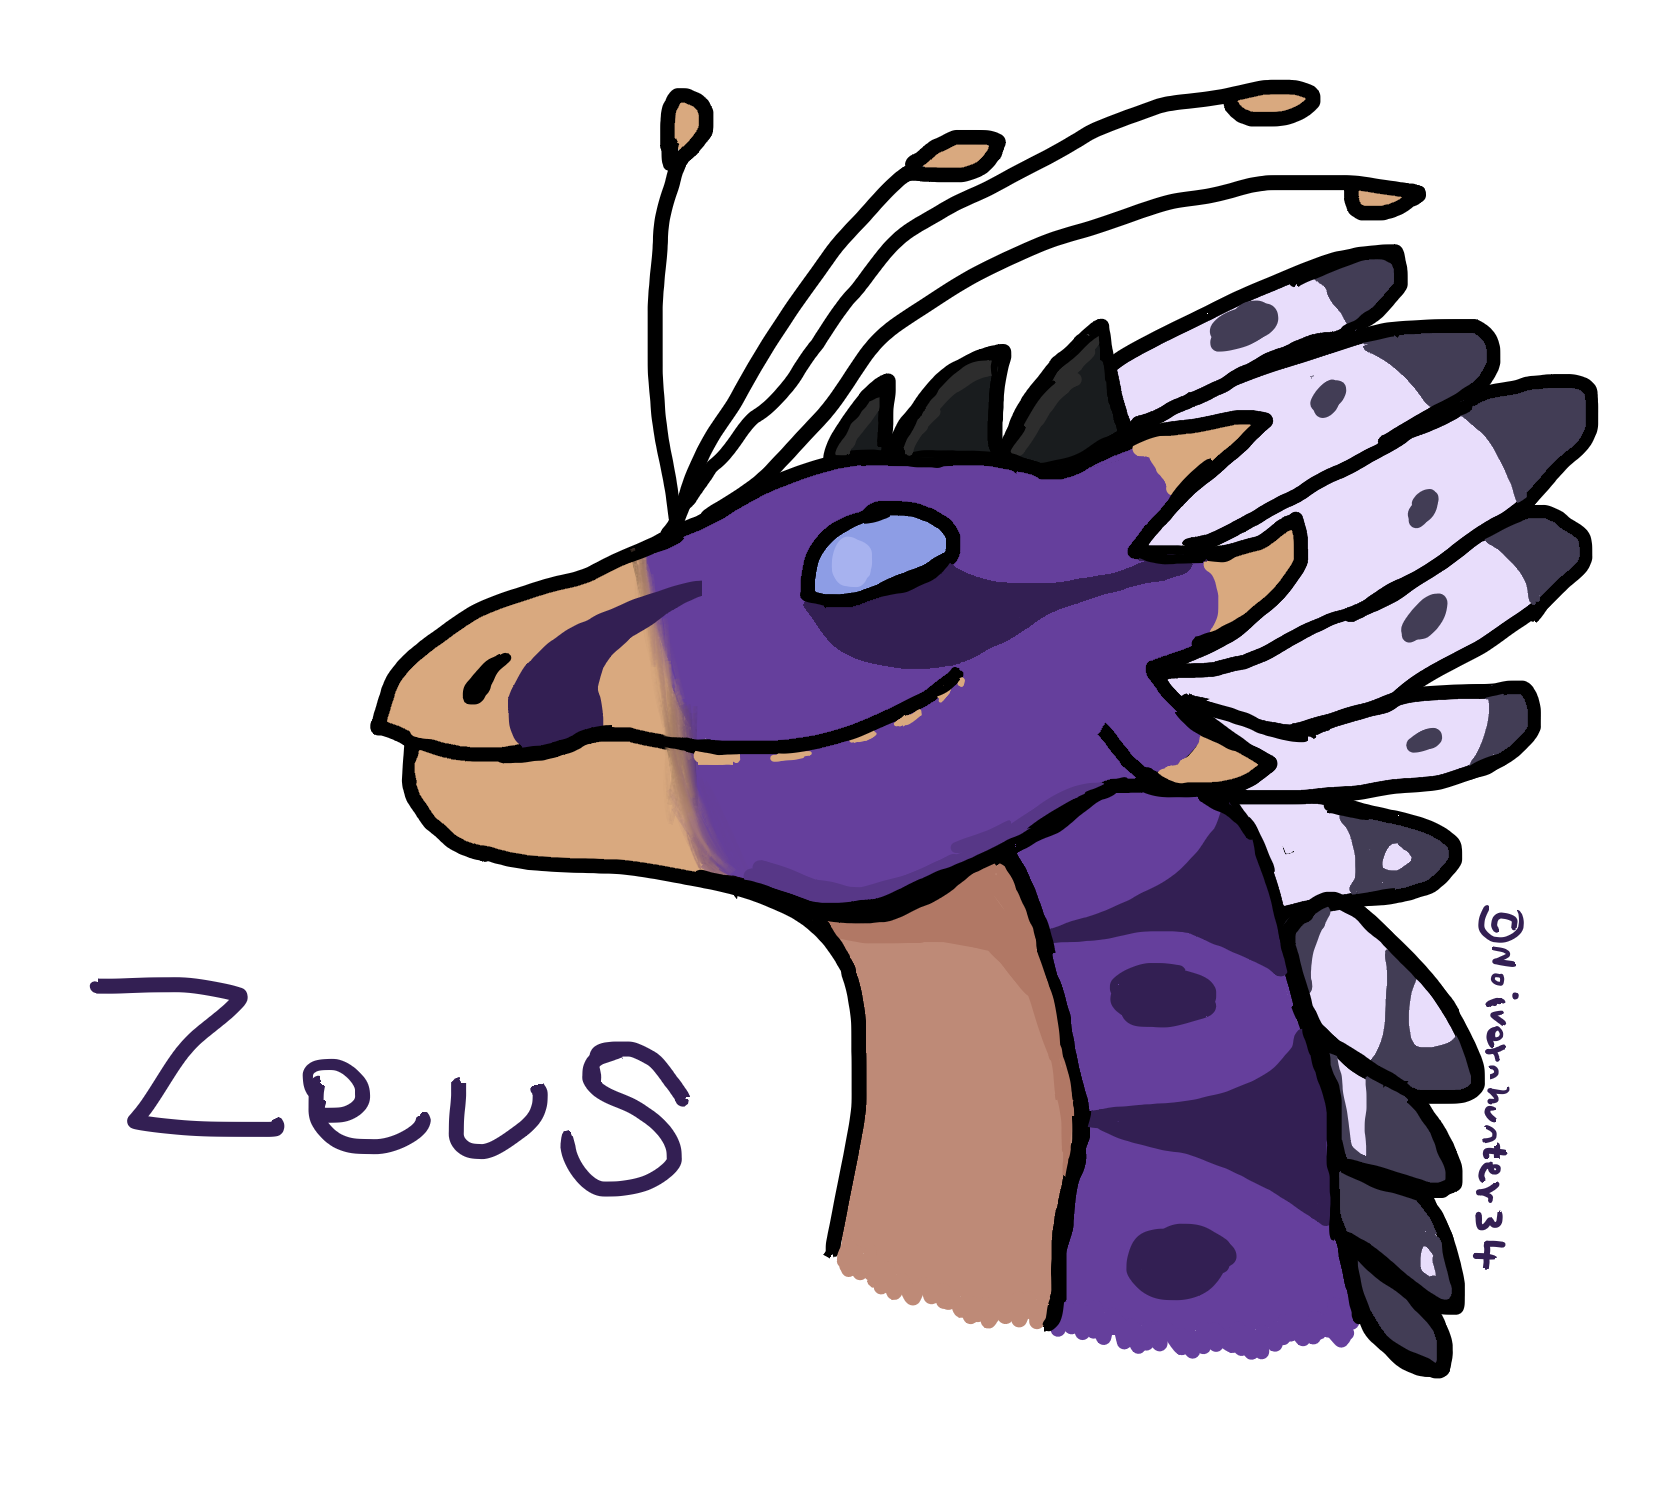 Zeus_Commision_by_Noivernhunter34.png